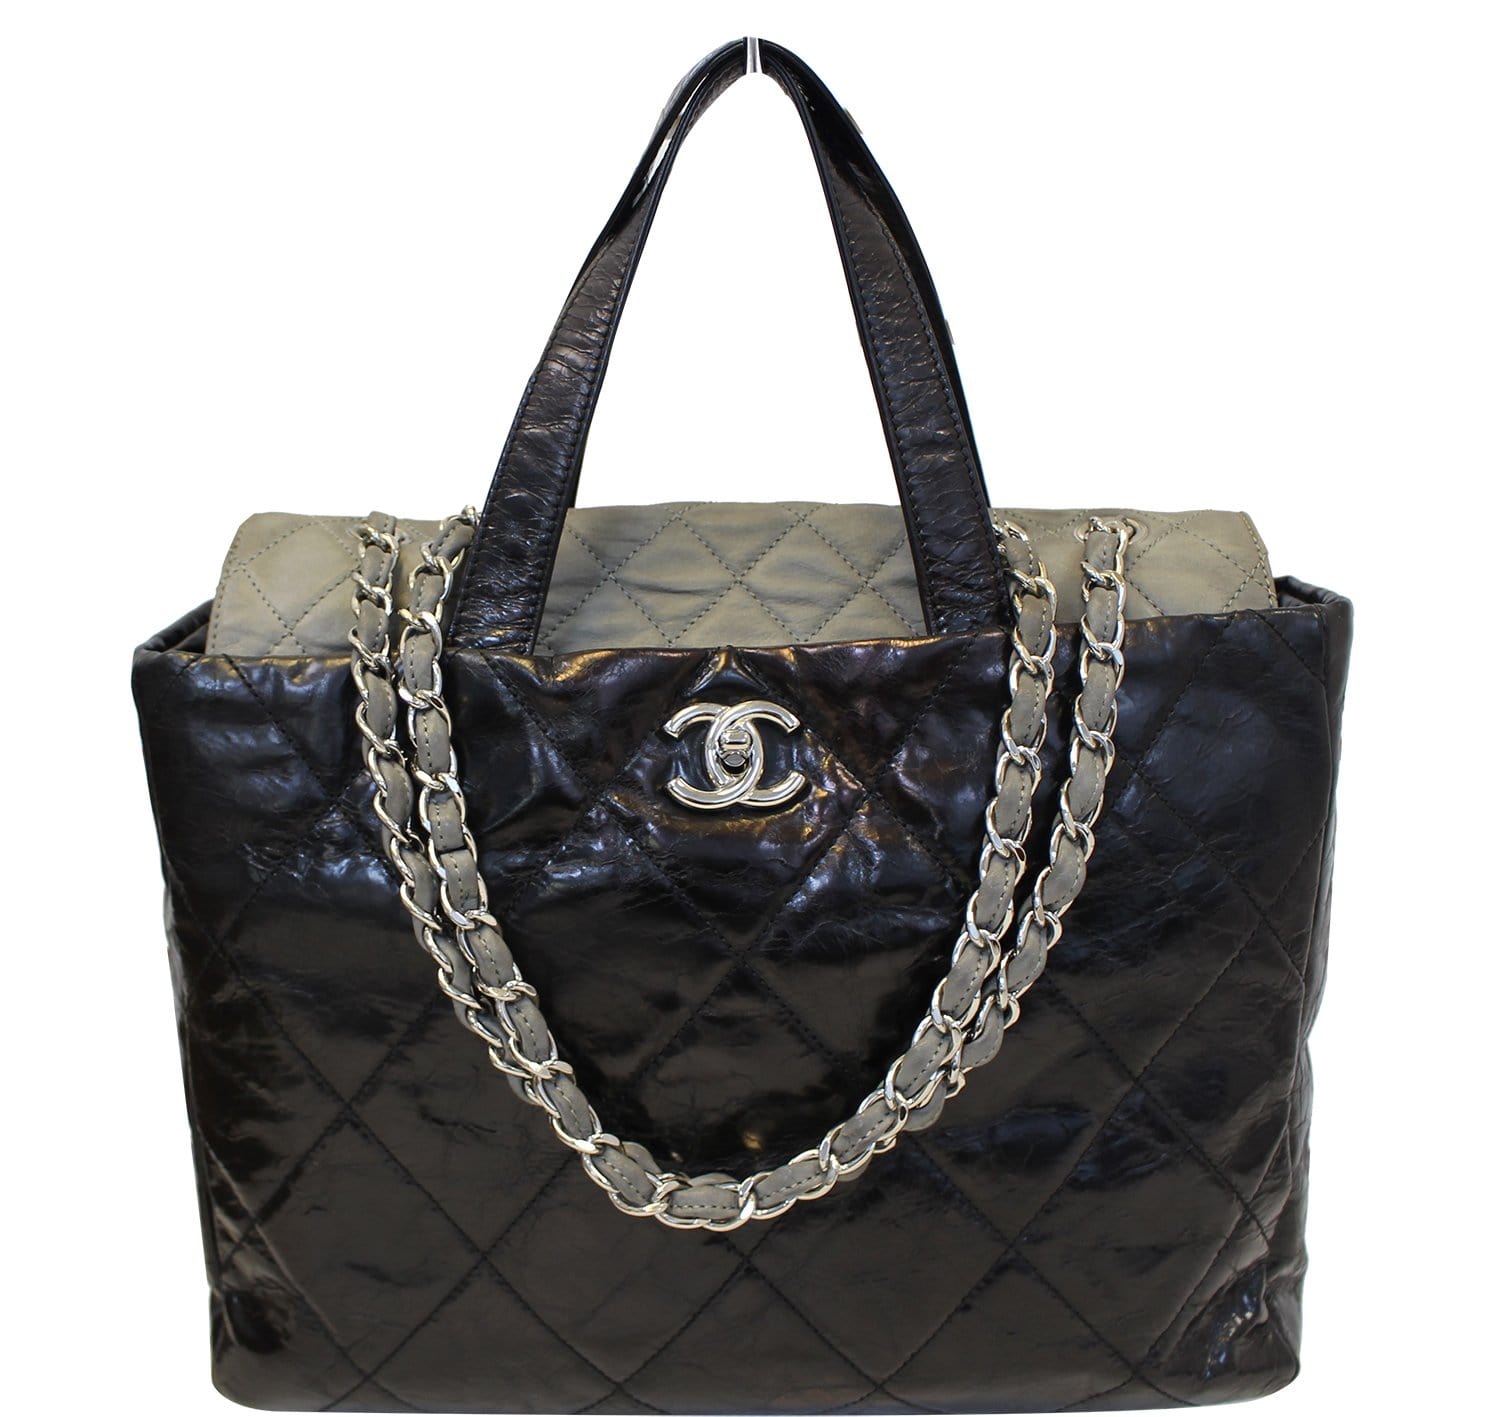 The Ultimate Chanel 22 Bag Review - Is This The New It-Bag